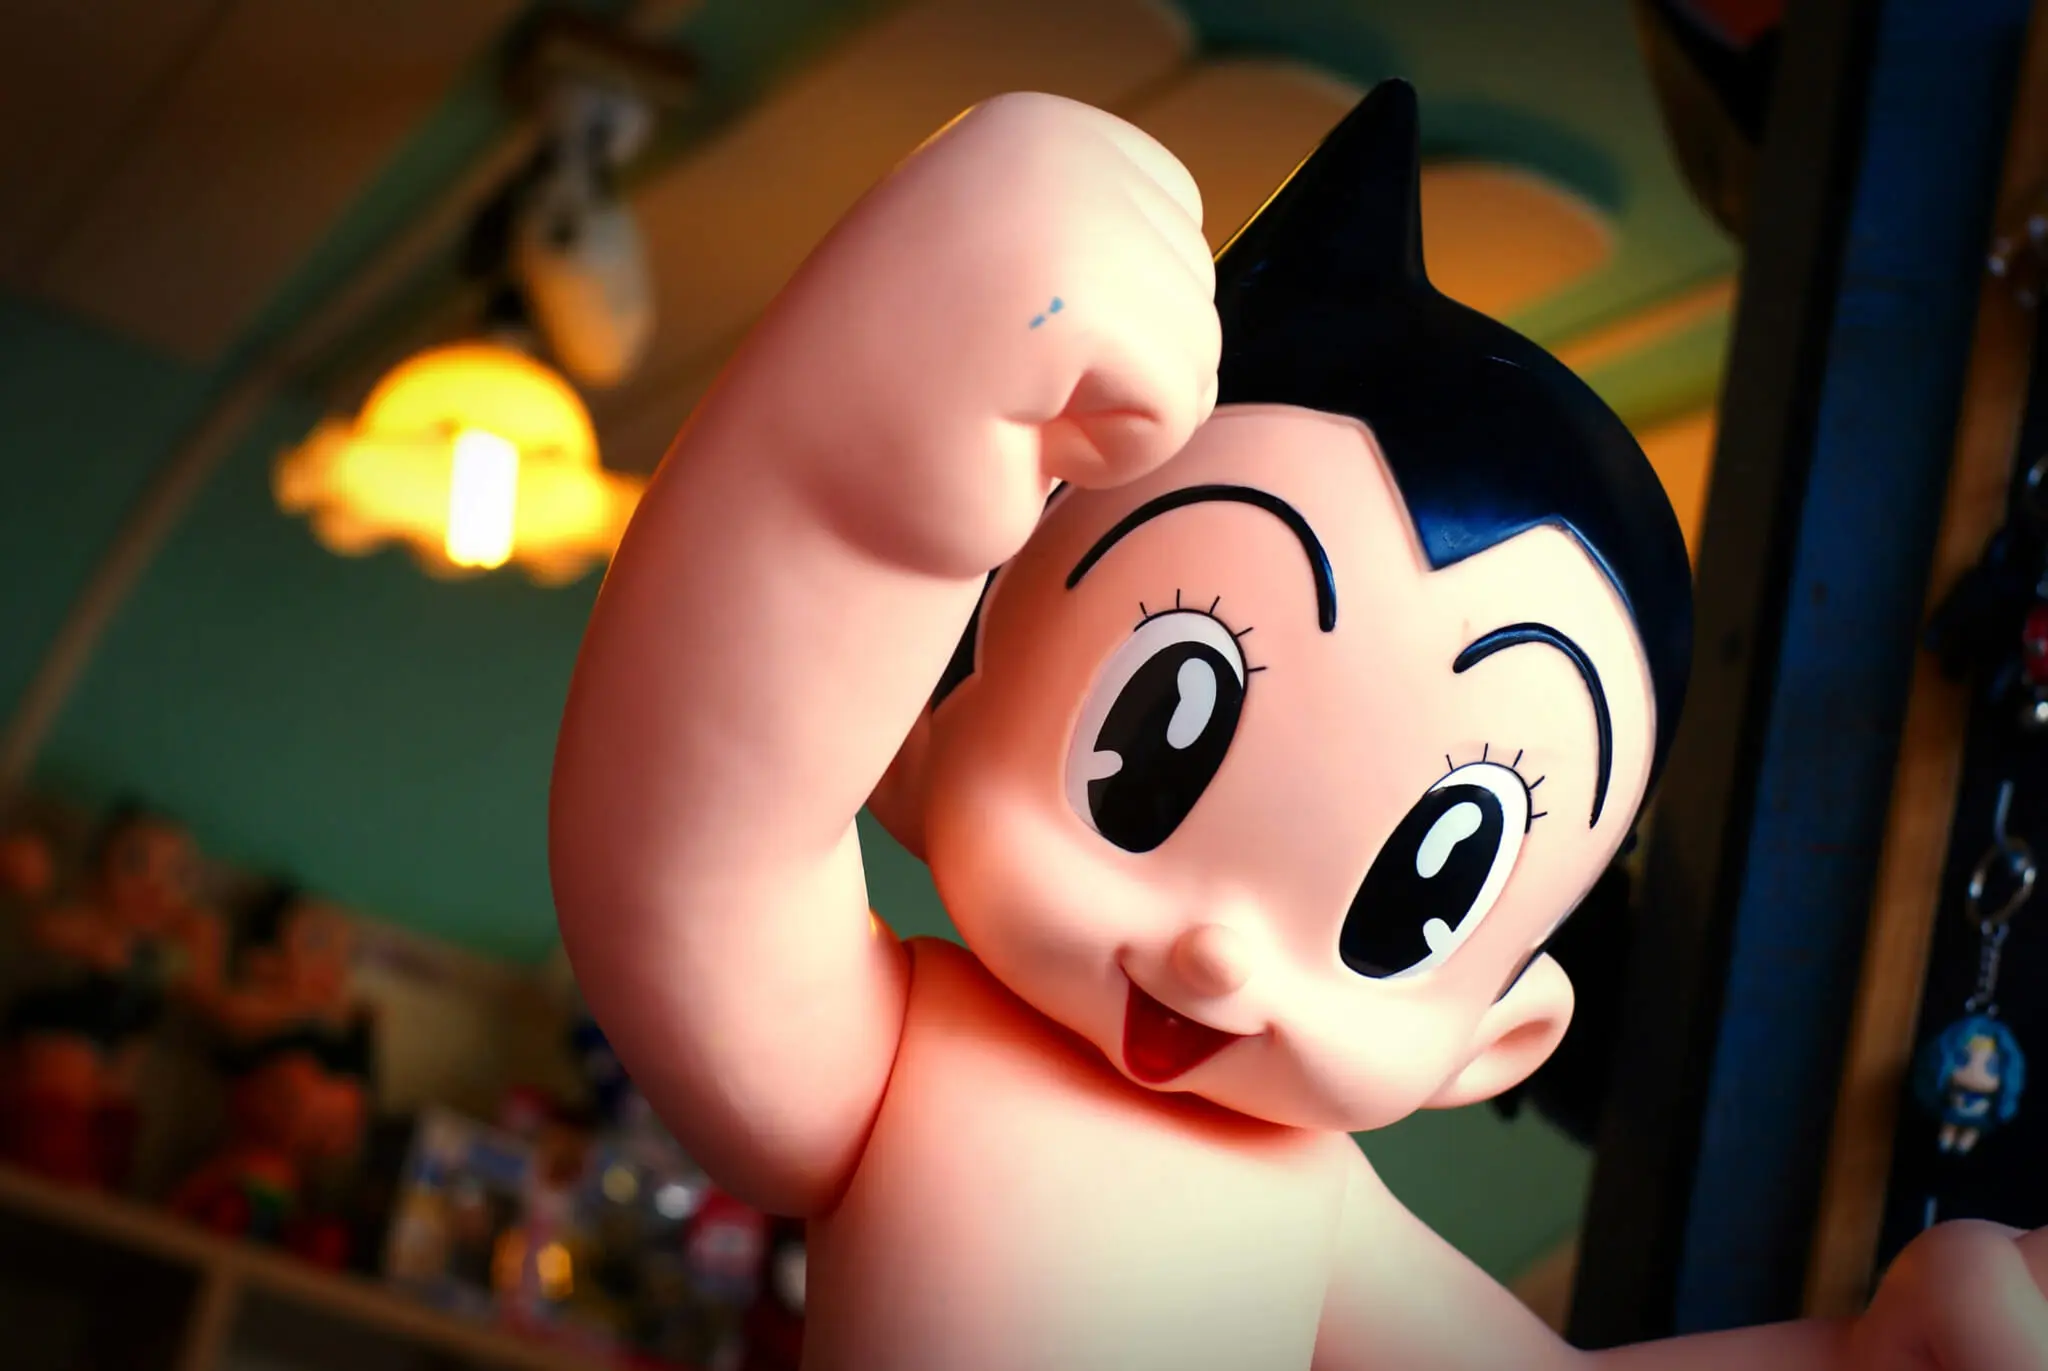 more pokemon characters that look like astro boy characters